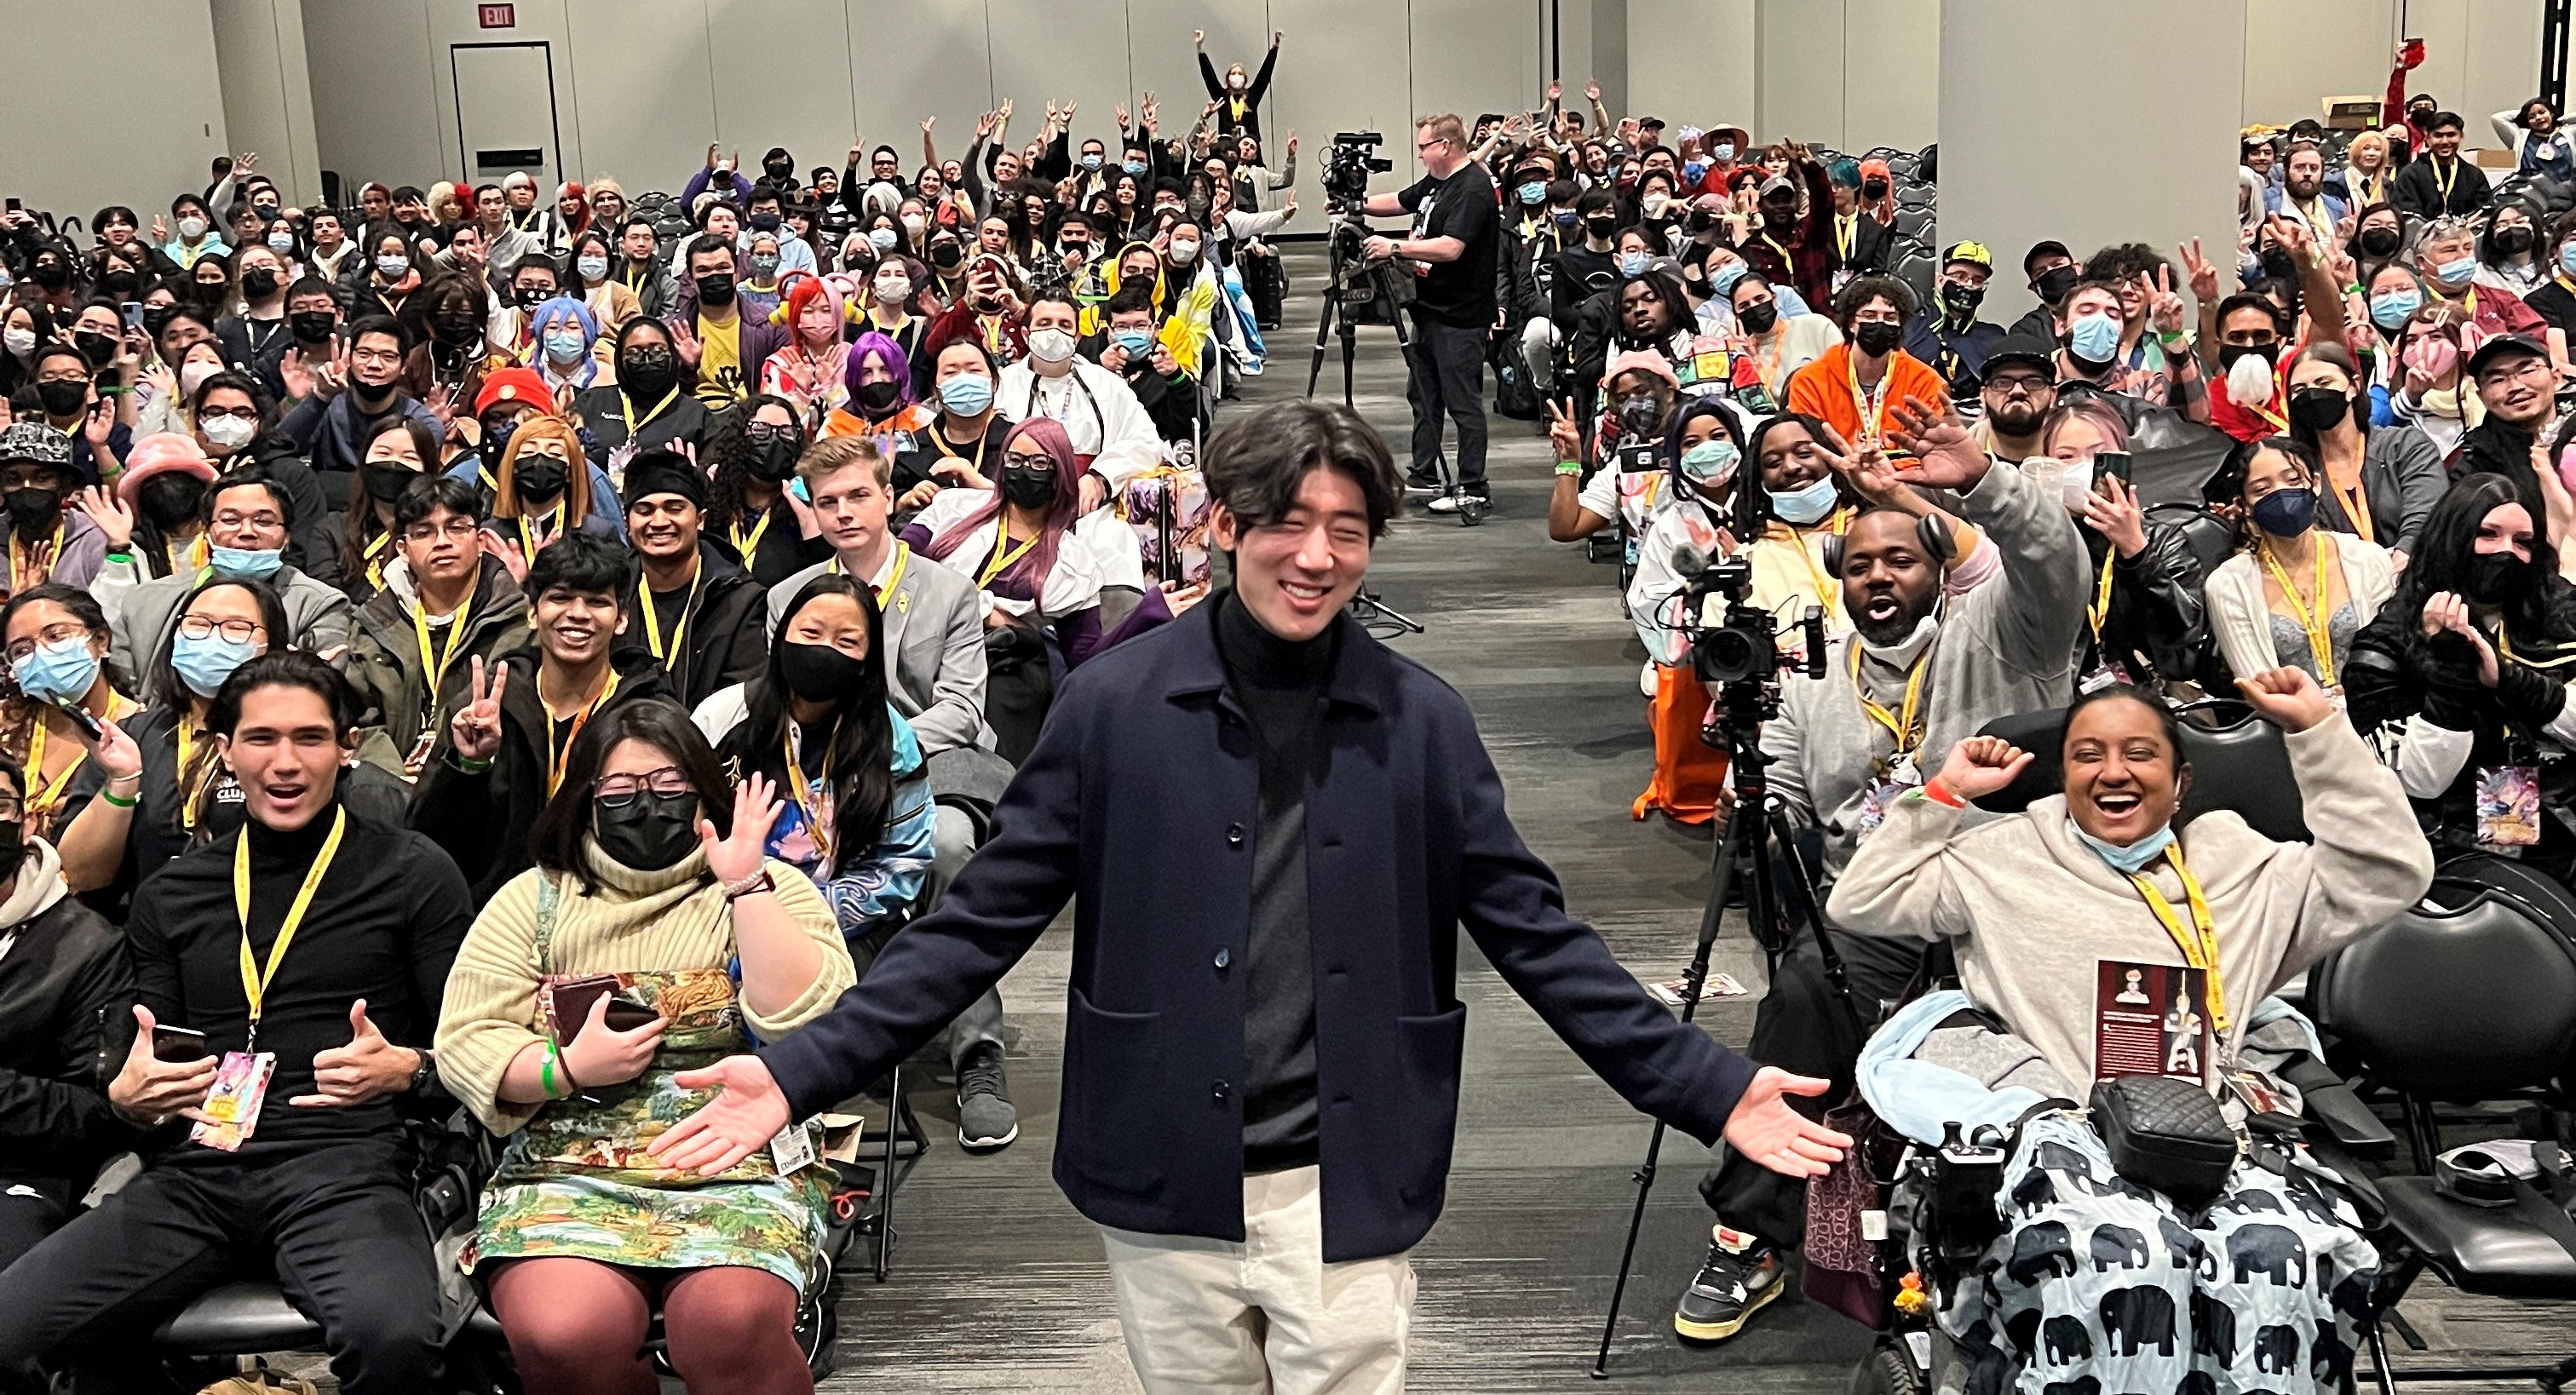 Cropped image of TurtleME aka Brandon Lee standing with his hands out in front of a packed panel at Anime NYC